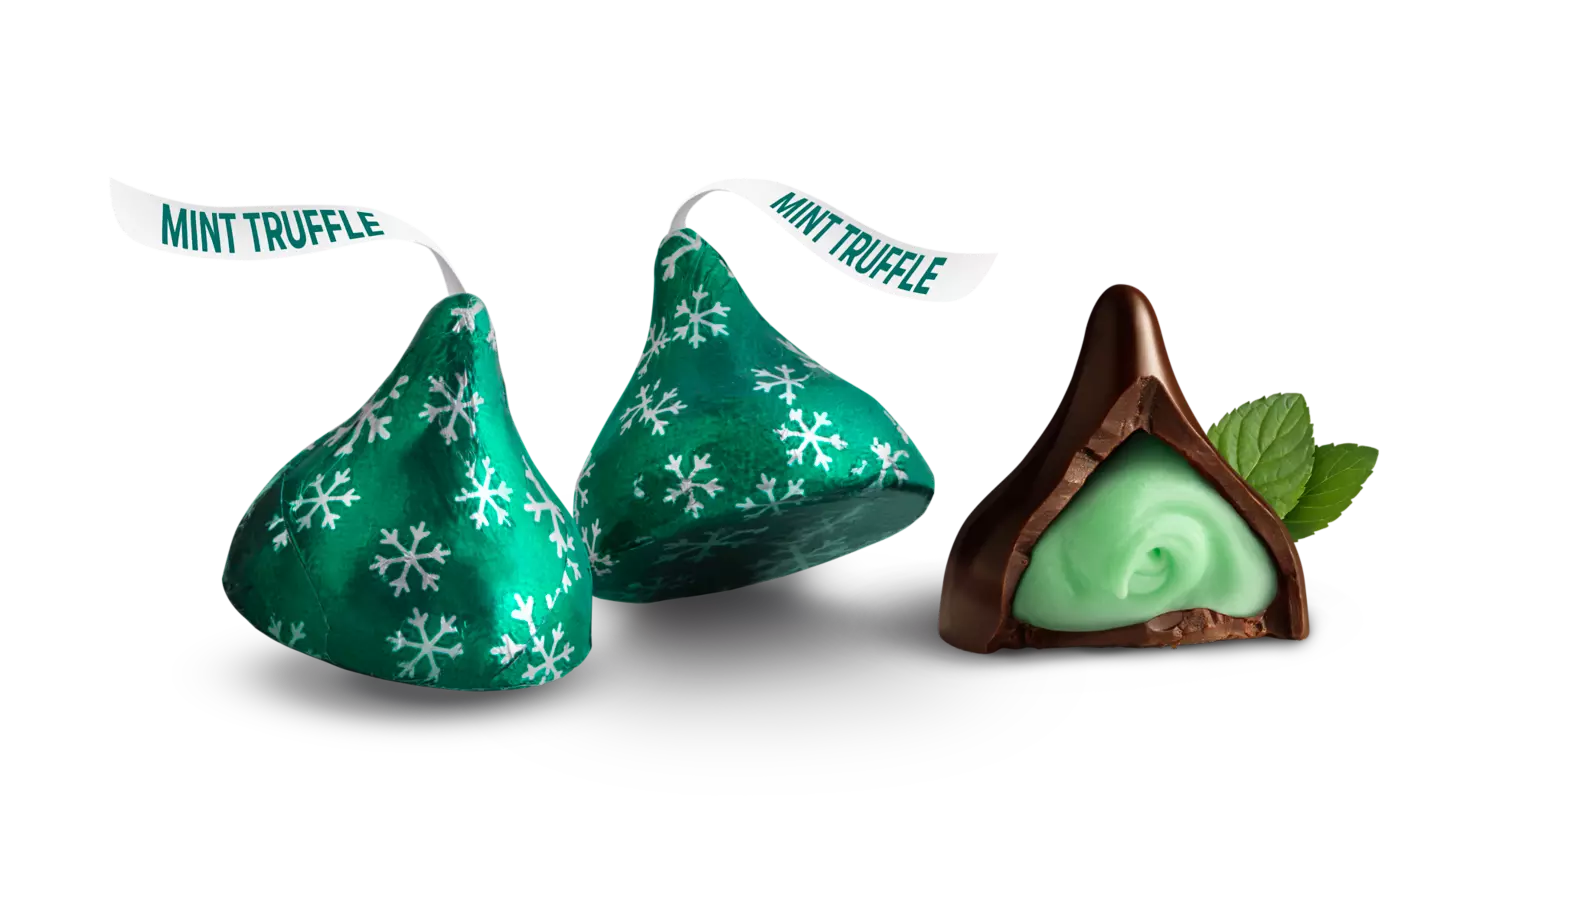 HERSHEY'S KISSES Mint Truffle Candy, 9 oz bag - Out of Package